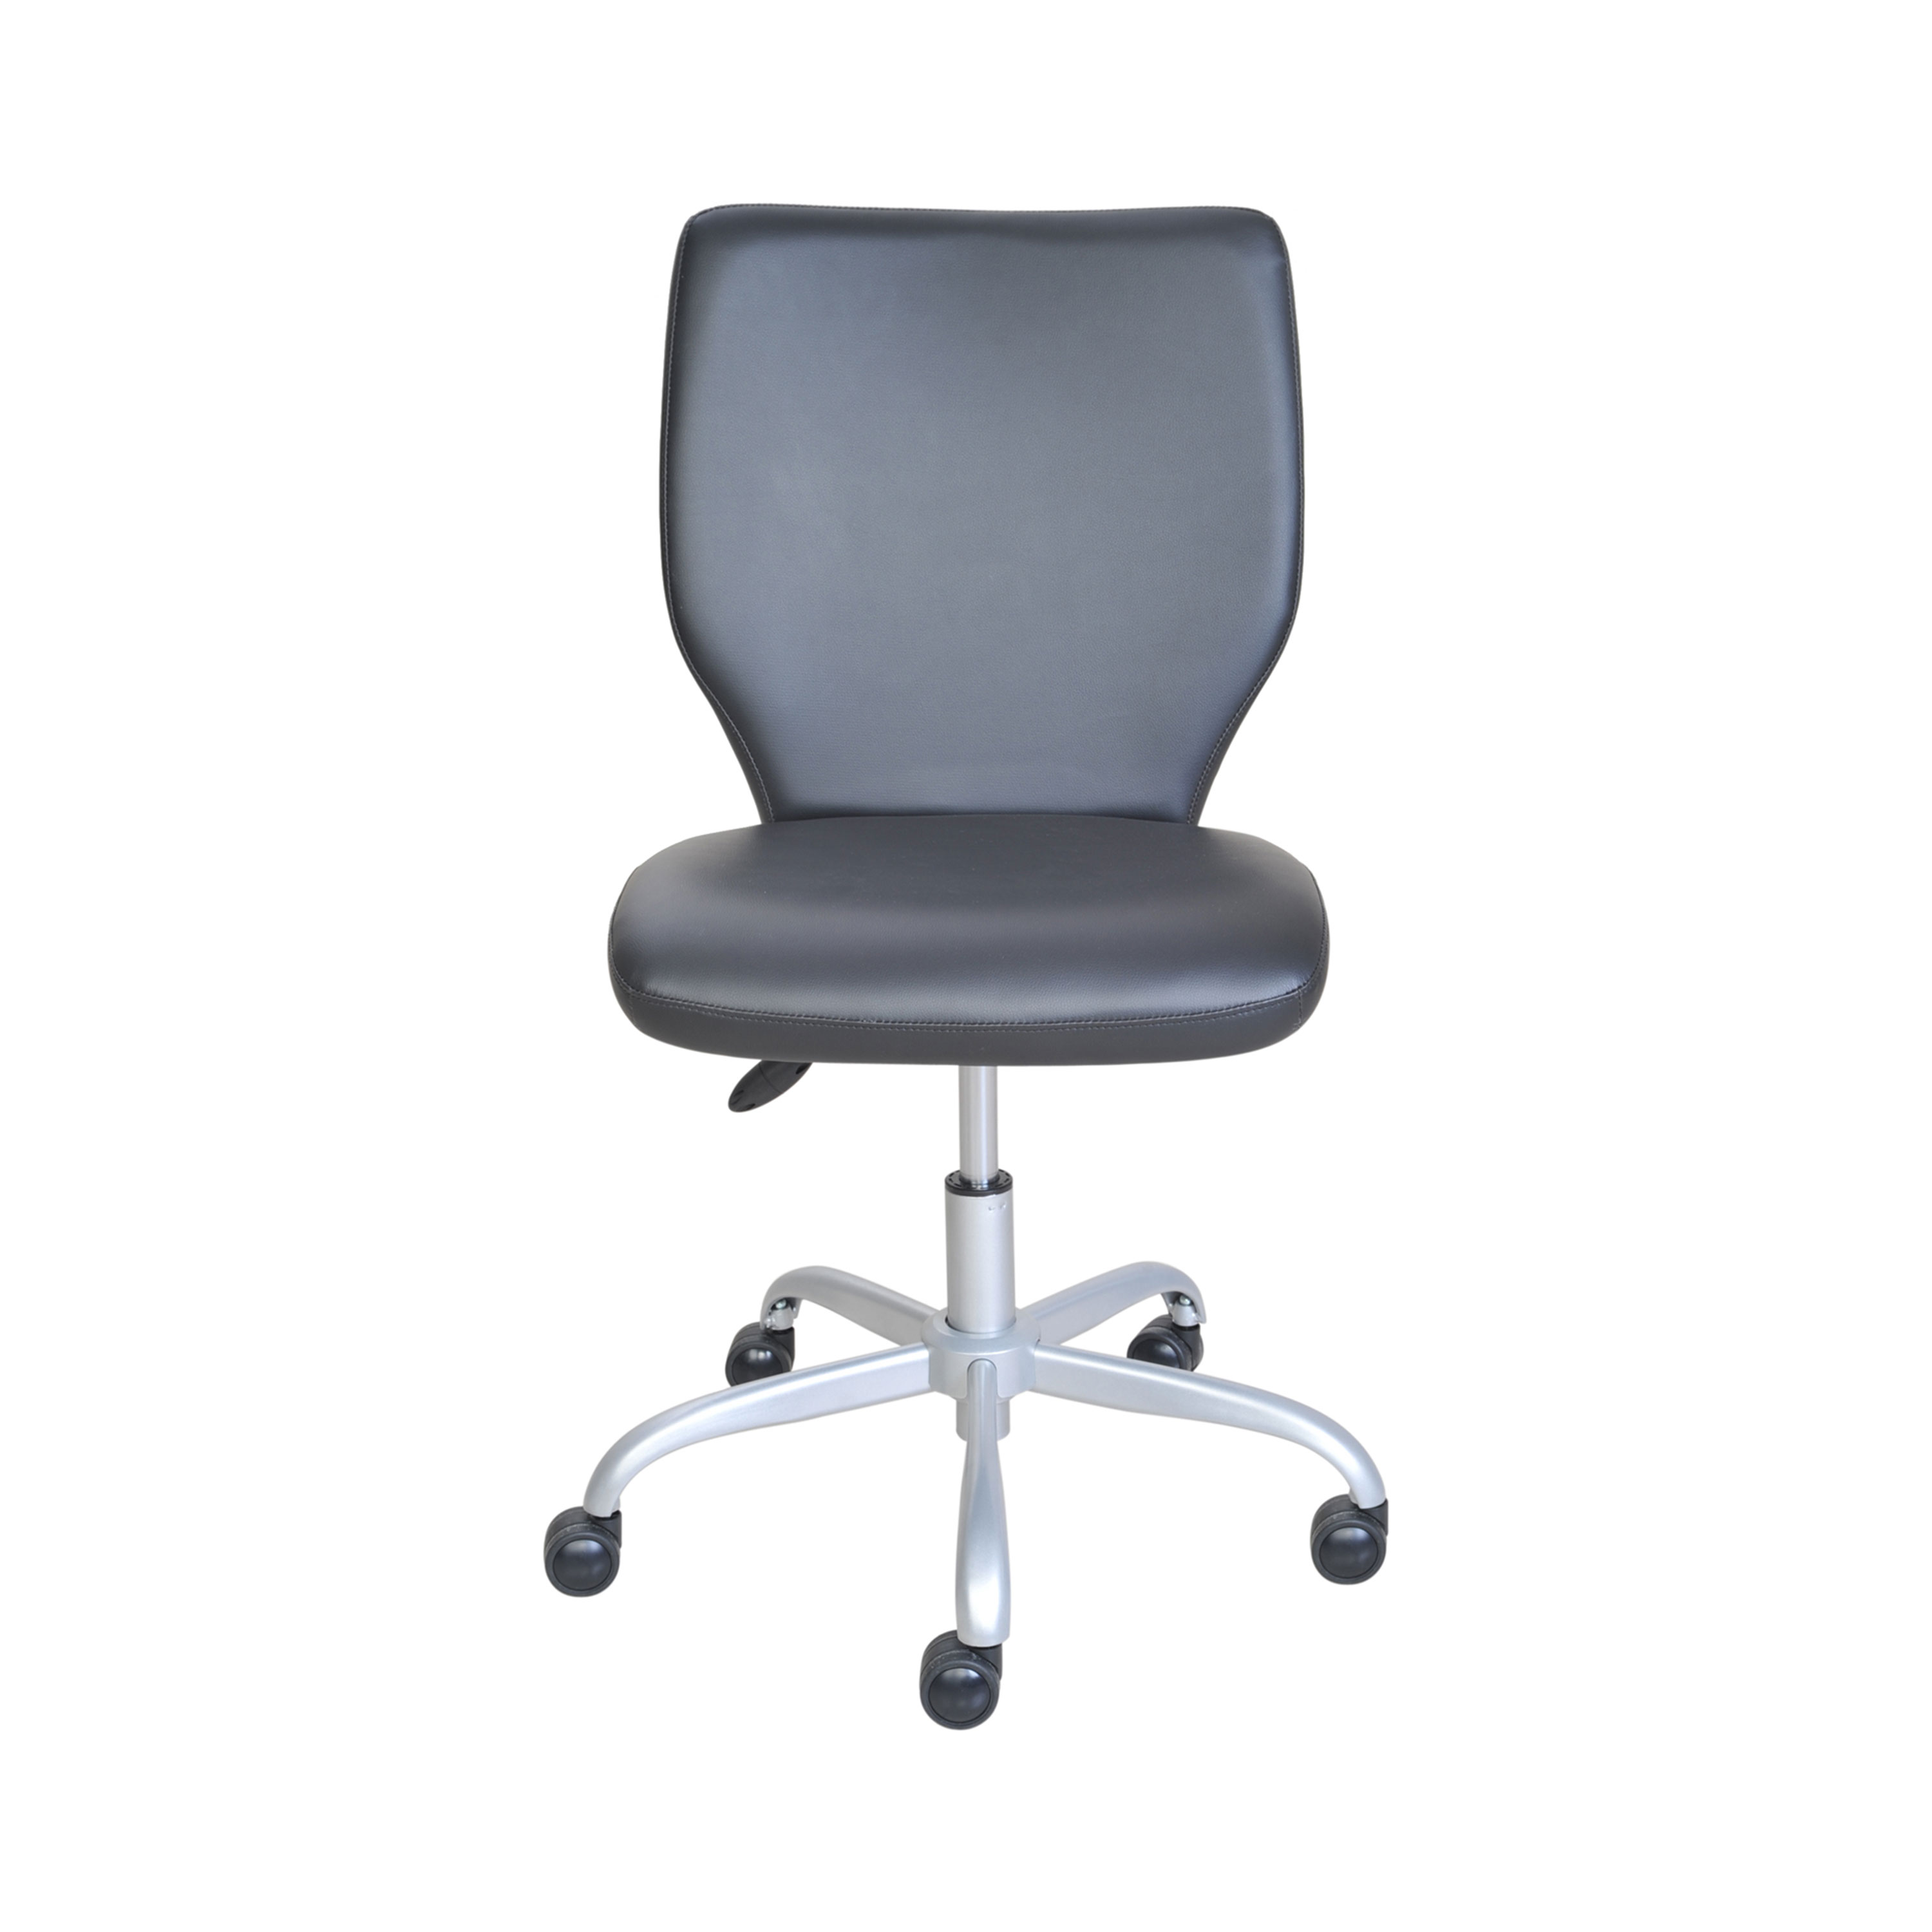 Mainstays Mid-Back Office Chair with Matching Color Casters, Gray Faux Leather - image 3 of 6